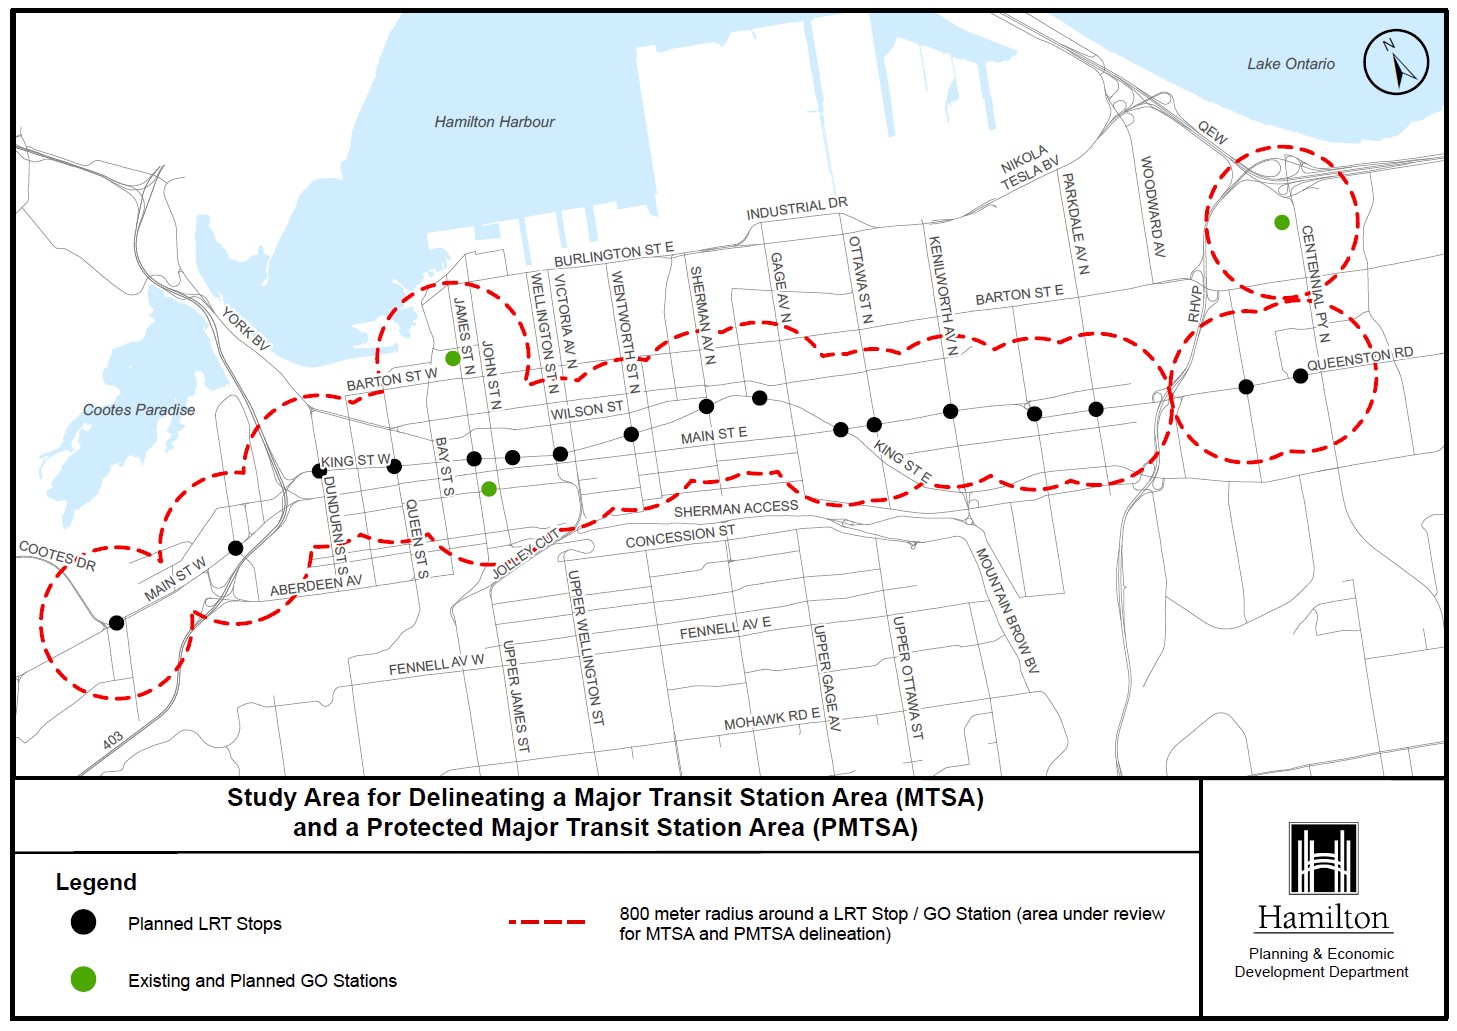 Study Area Map of Inclusionary Zoning for Delineating MTSA and PMTSA